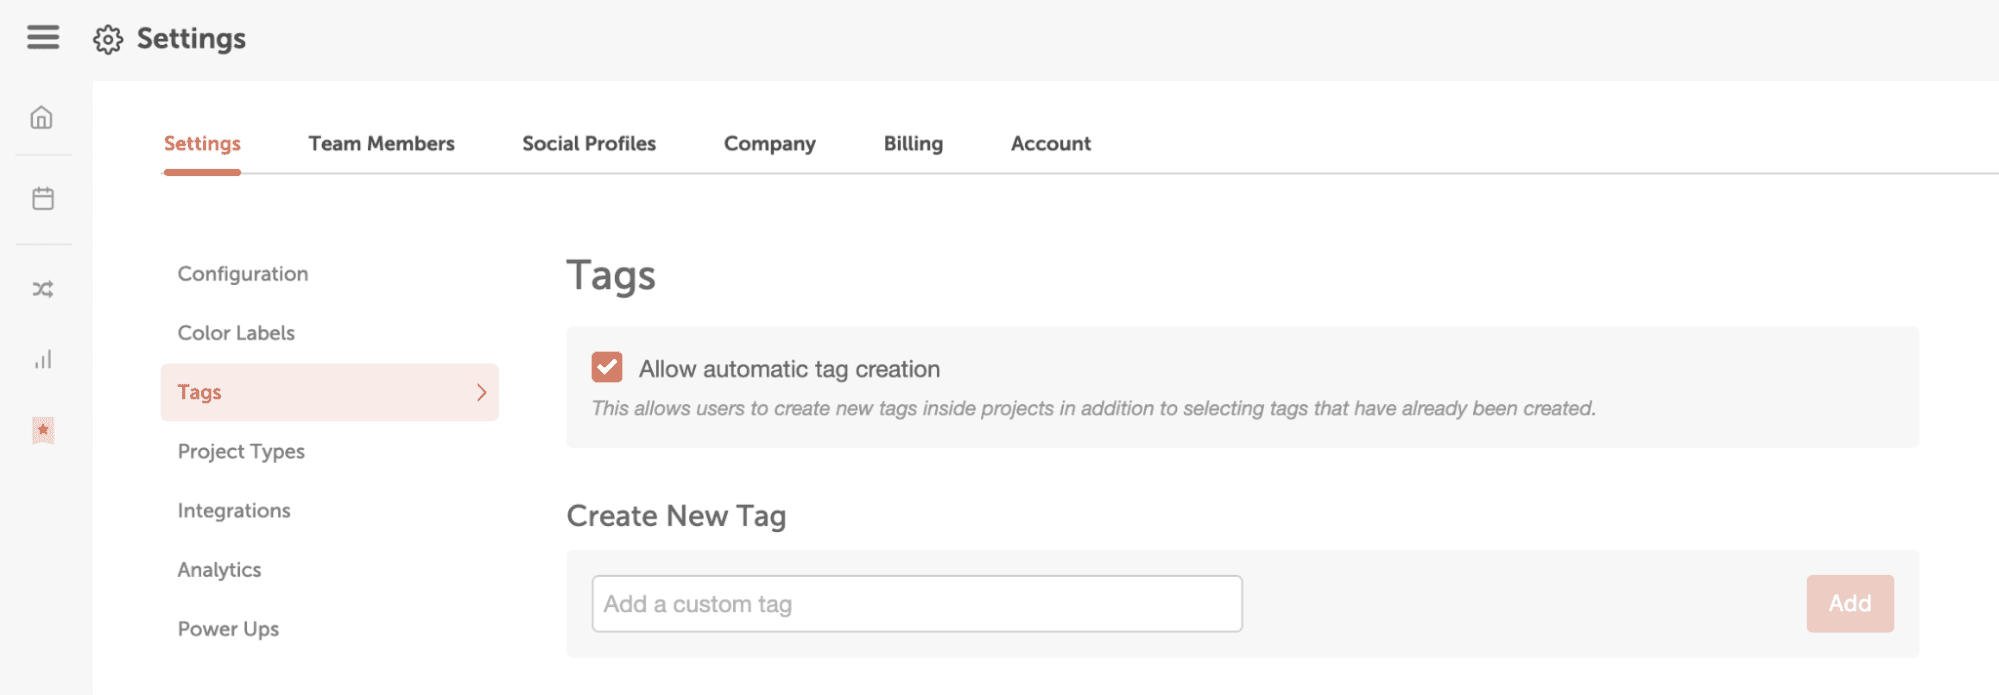 image showing tags enabled in settings